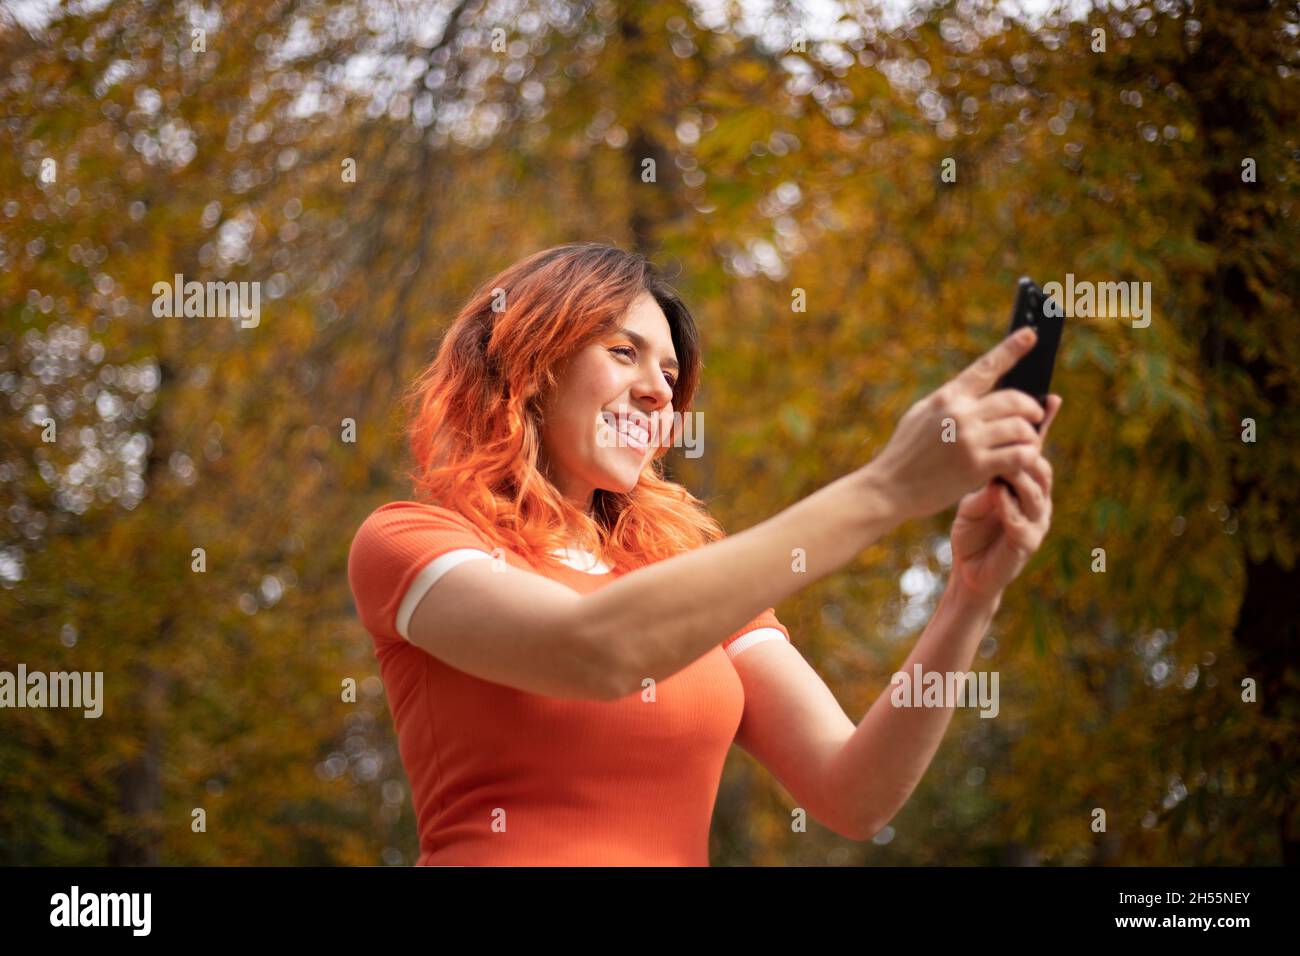 happy red-haired woman with cell phone in hand in a park in autumn Stock Photo